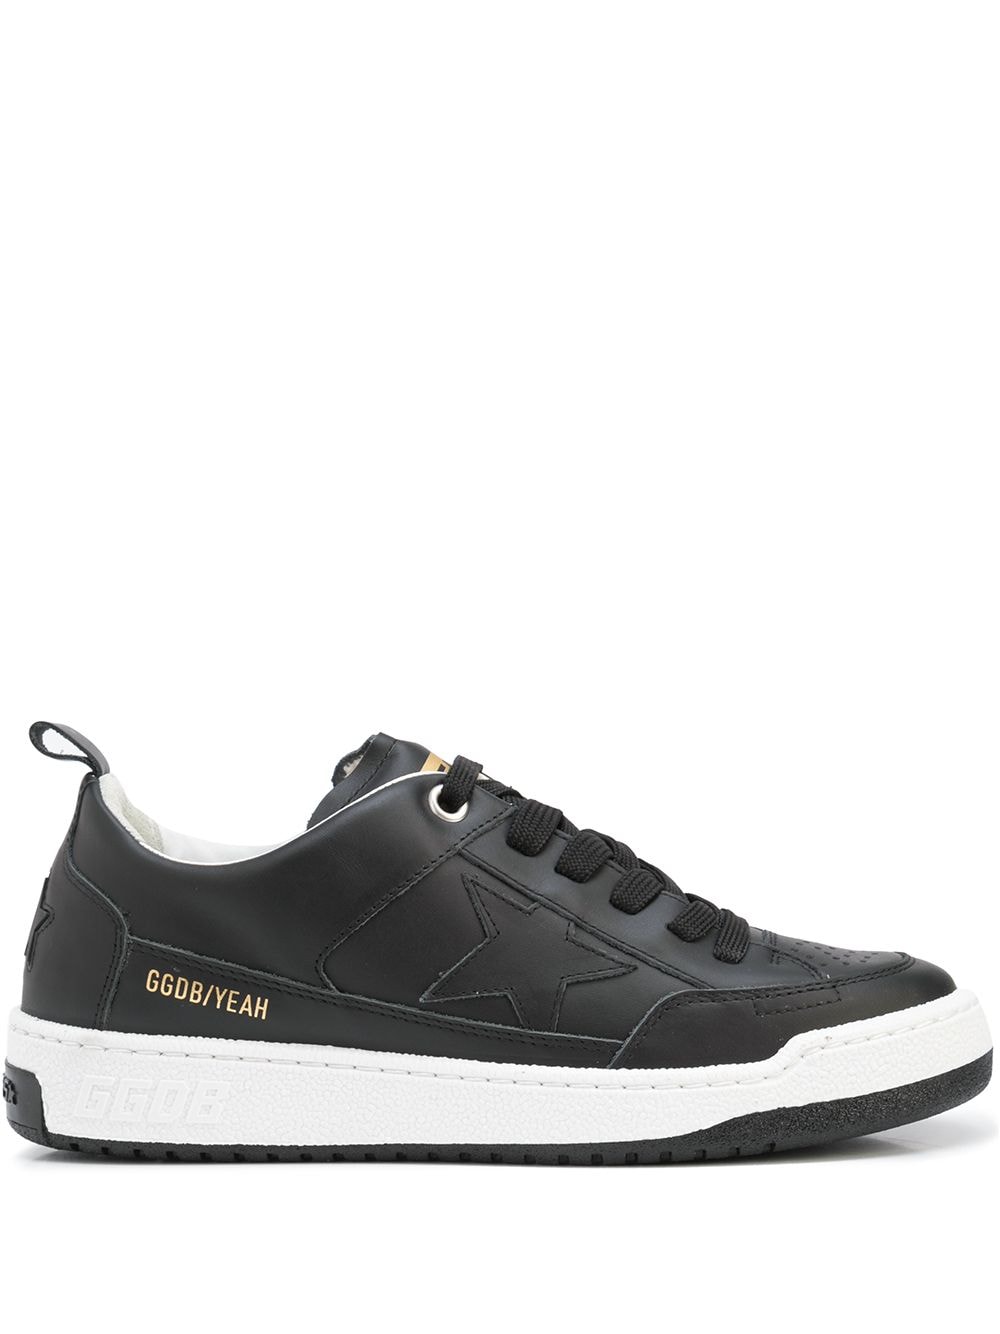 Image 1 of Golden Goose Yeah leather low-top sneakers